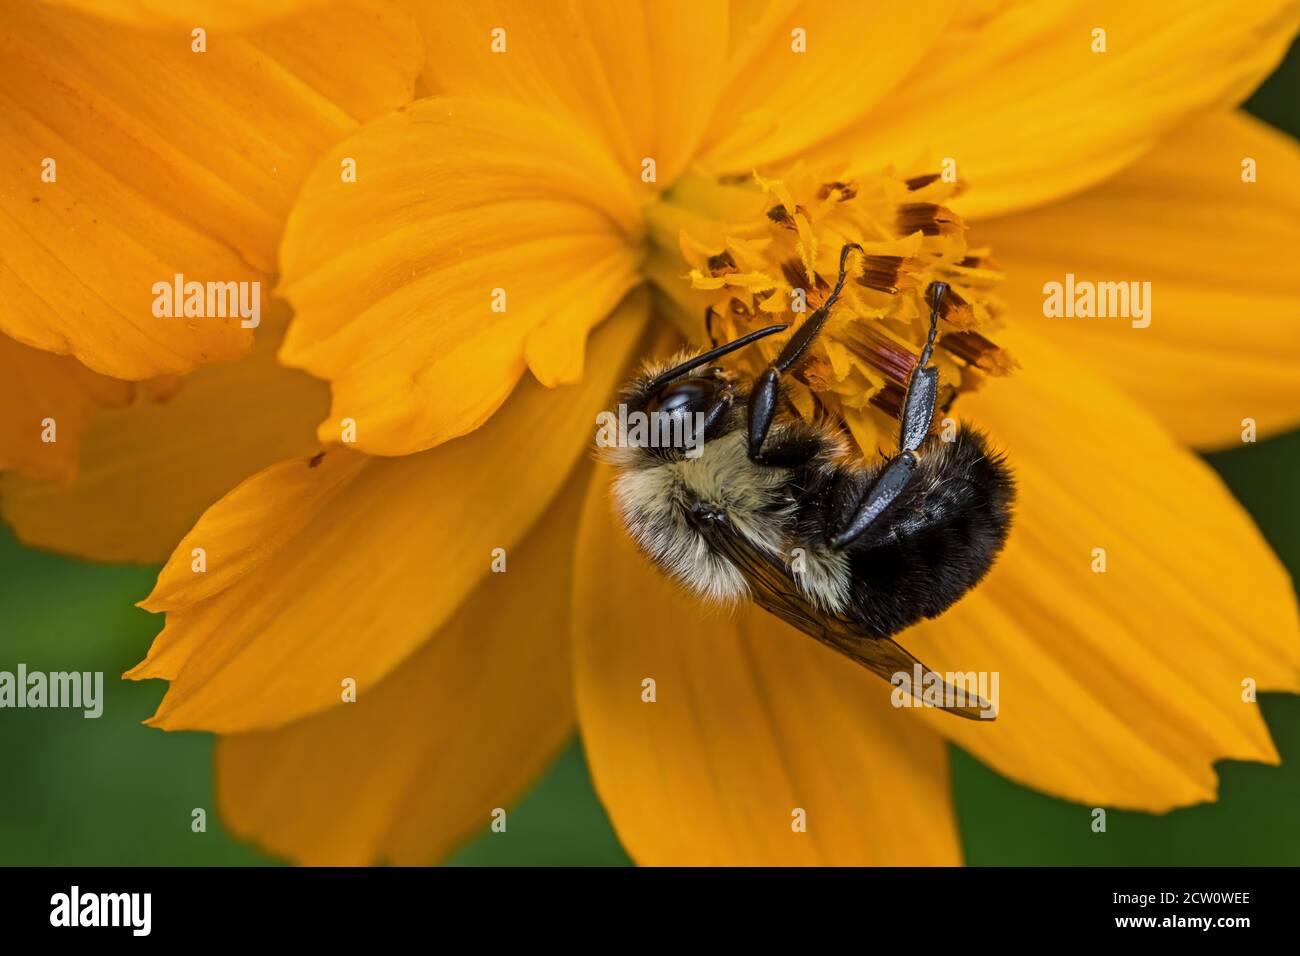 Bumblebee which is a member of the genus Bombus, part of Apidae on orange cosmos flower. Cosmos are herbaceous perennial plants or annual plants. Stock Photo